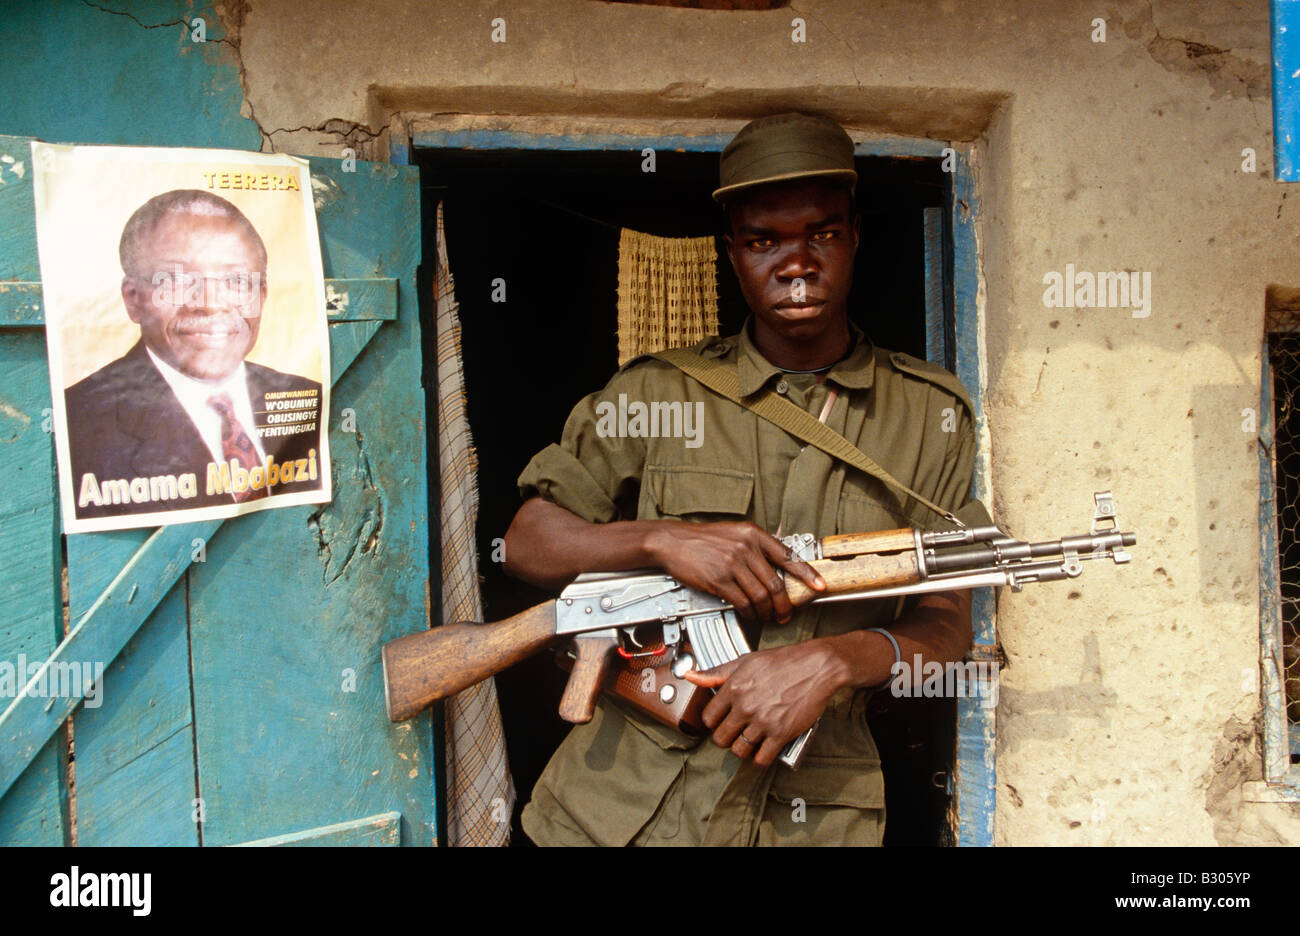 Man with gun standing next to a poster of a politician in Uganda. Stock Photo